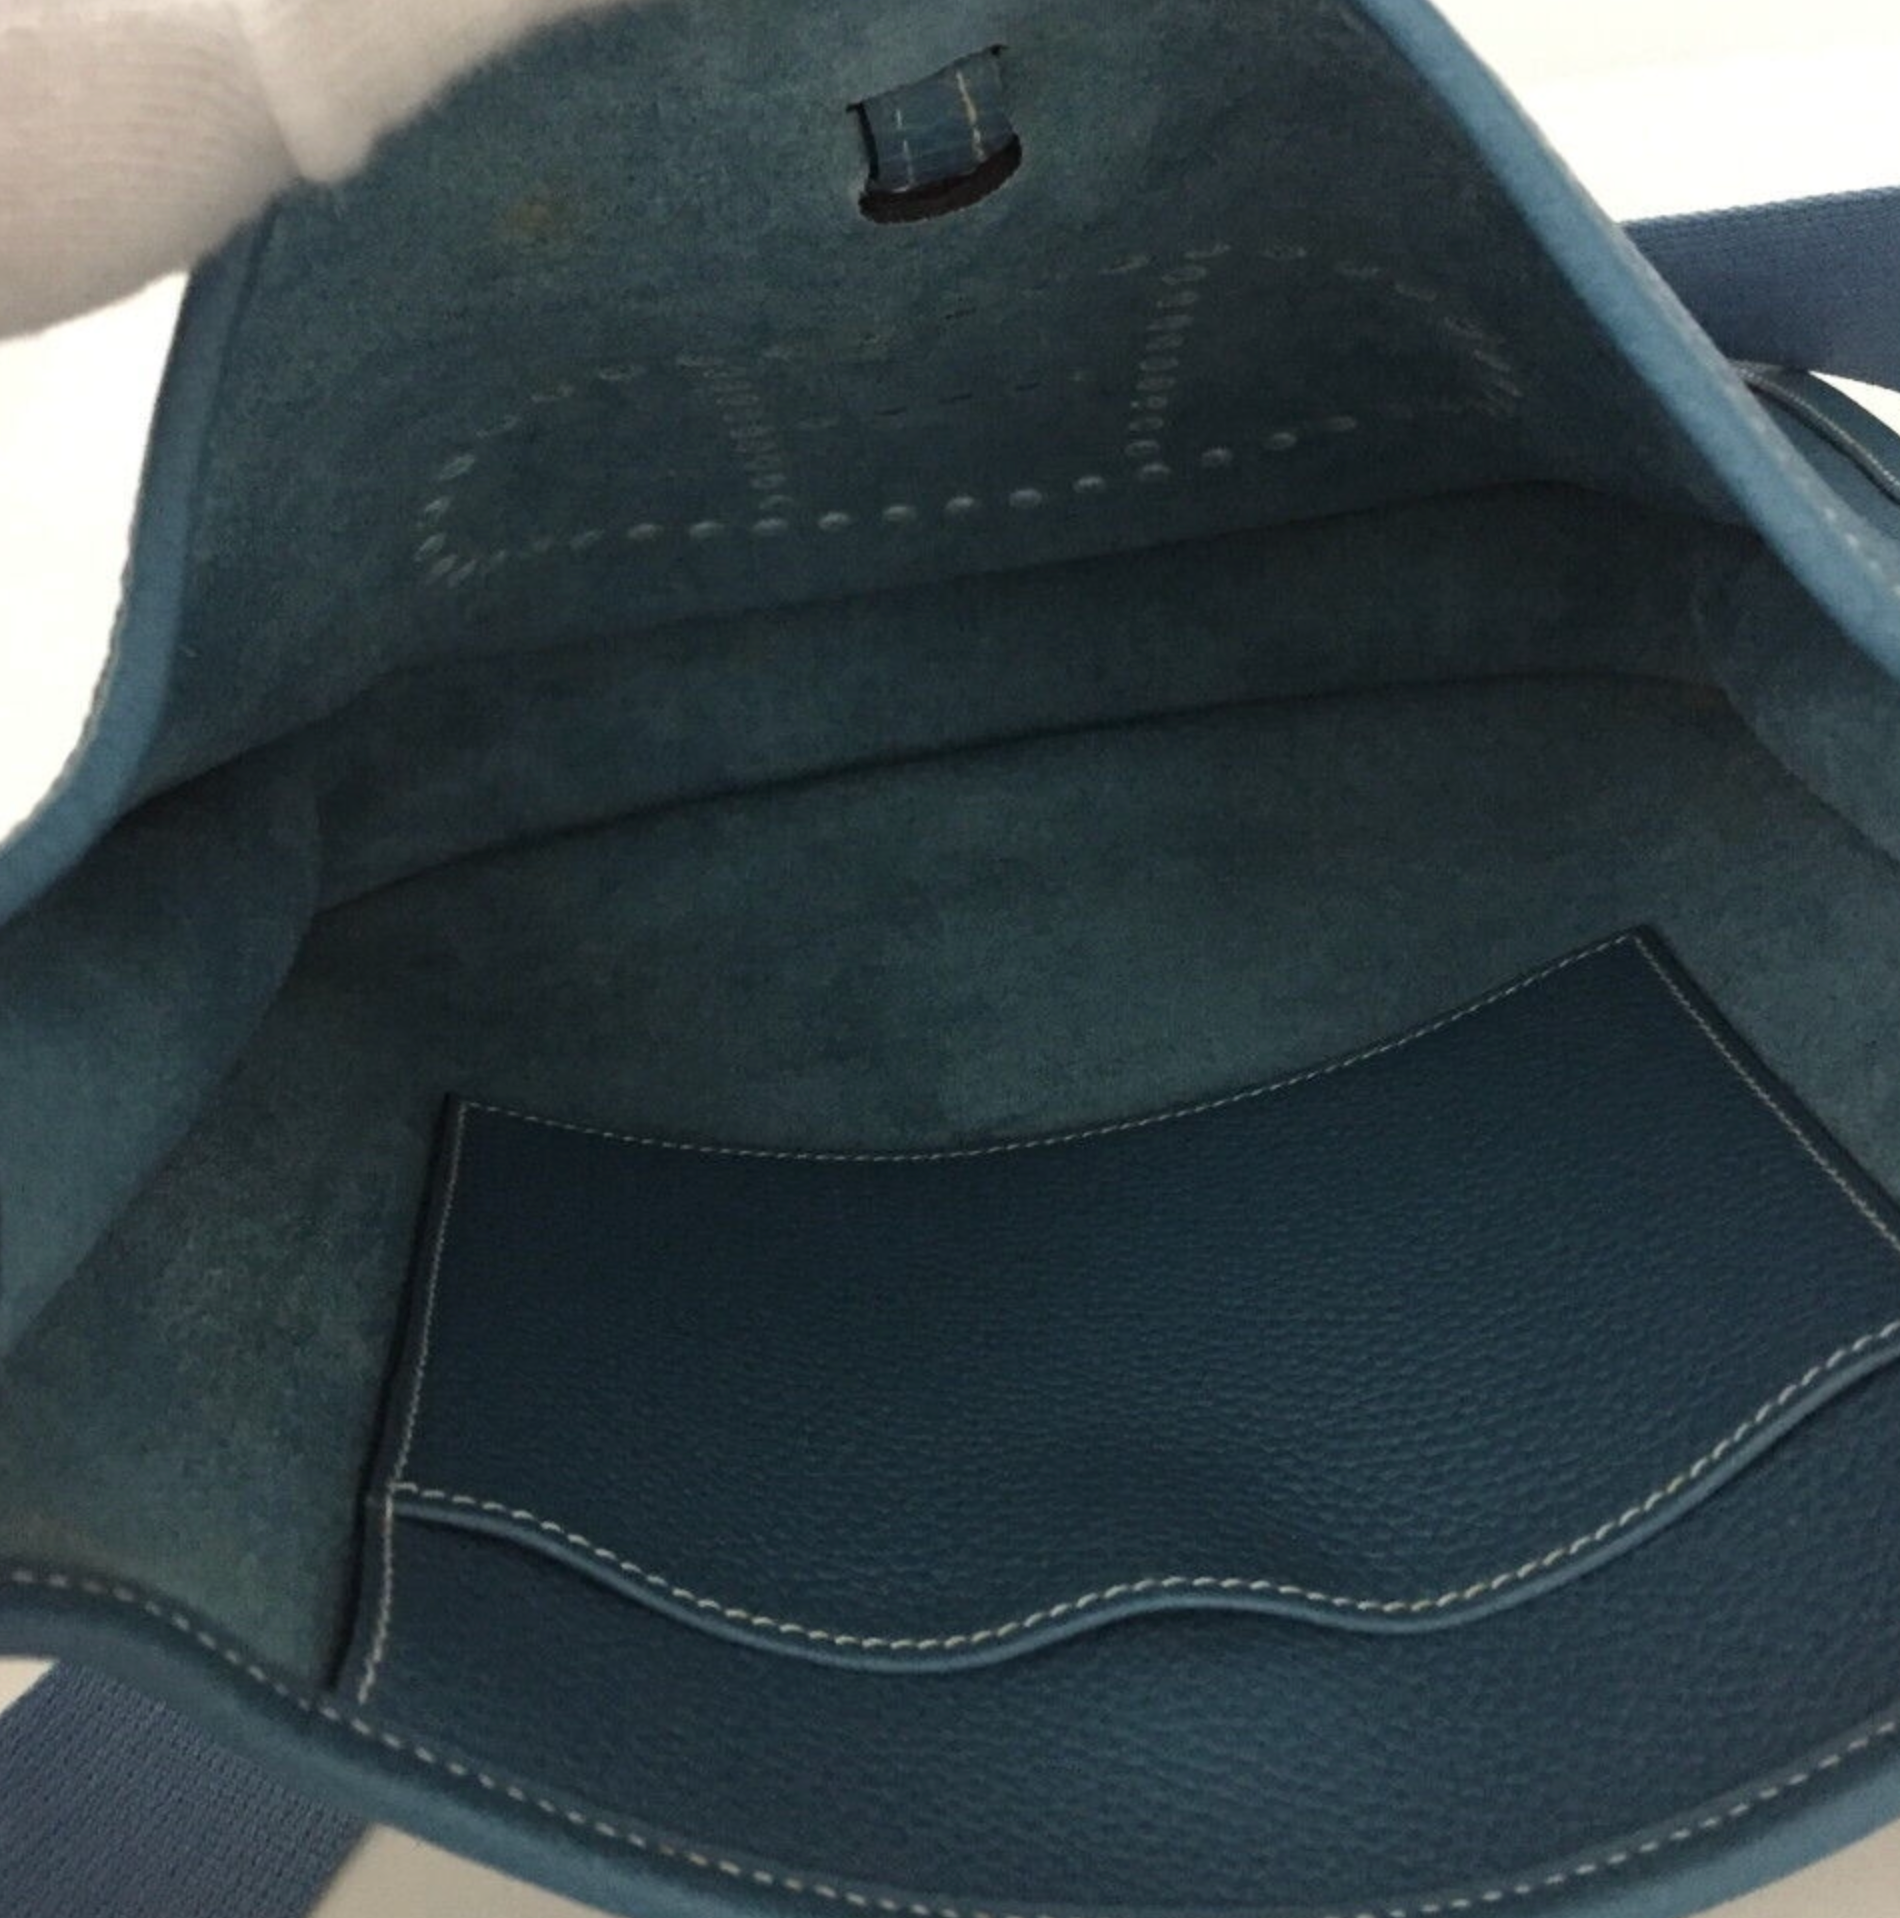 Hermes Blue Taurillon Clemence Leather Cabasellier 31 Tote Bag – ASC Resale